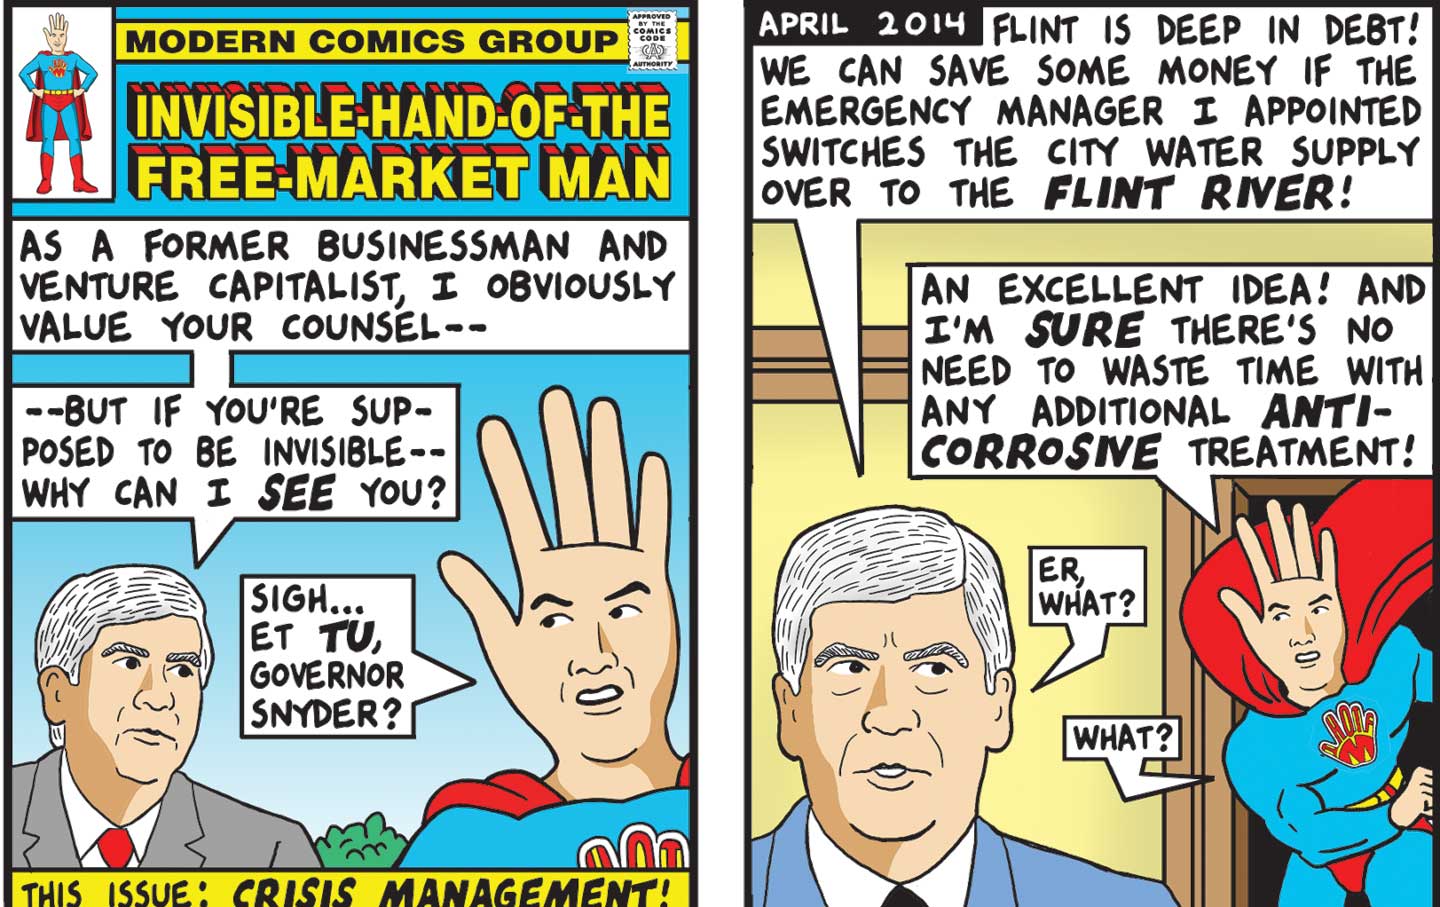 Invisible-Hand-of-the-Free-Market Man in Flint